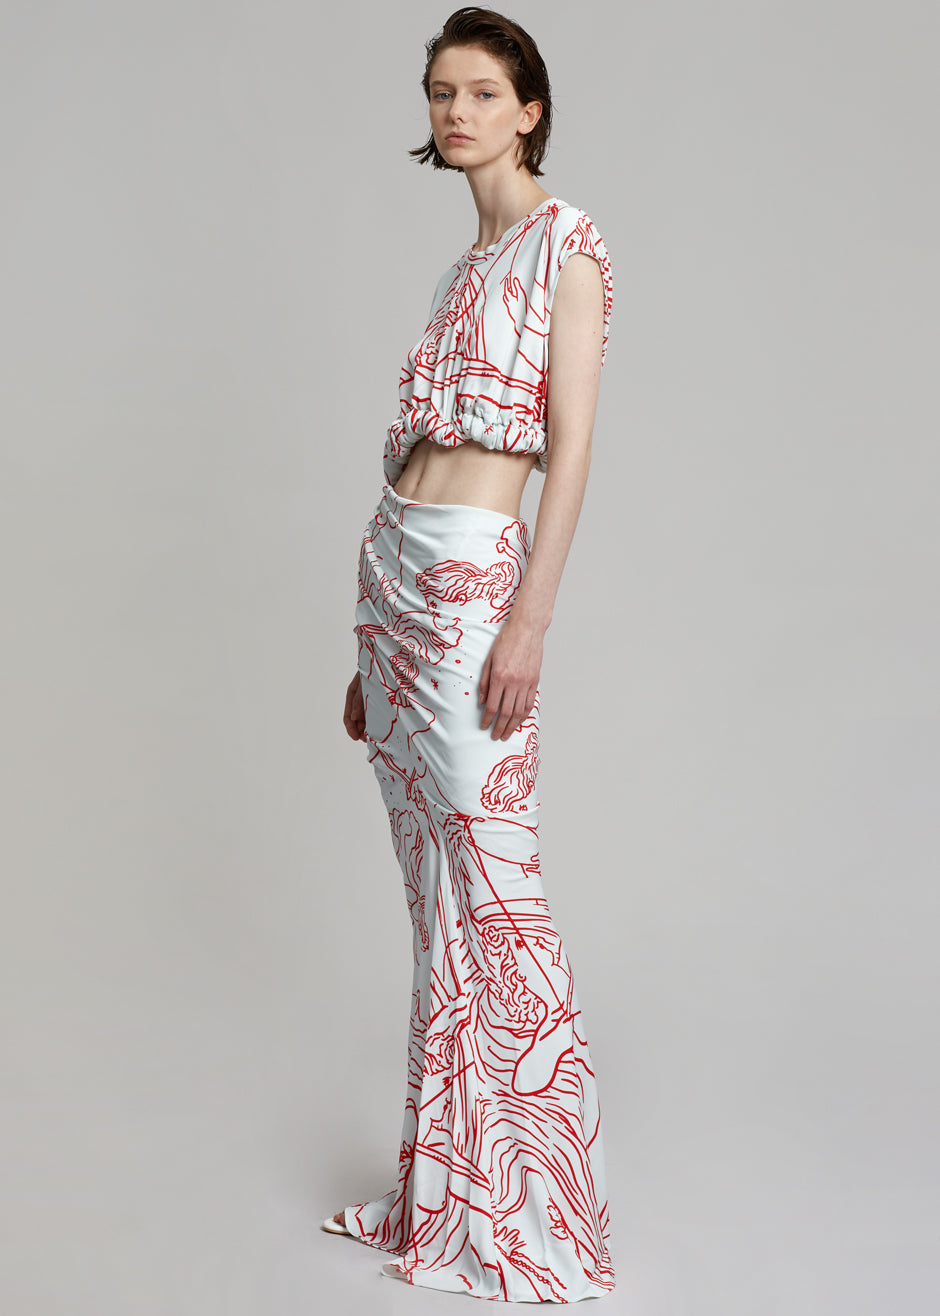 Christopher Esber Sculpted Twisted Tank Dress - Odyssey Print in Ice/Red